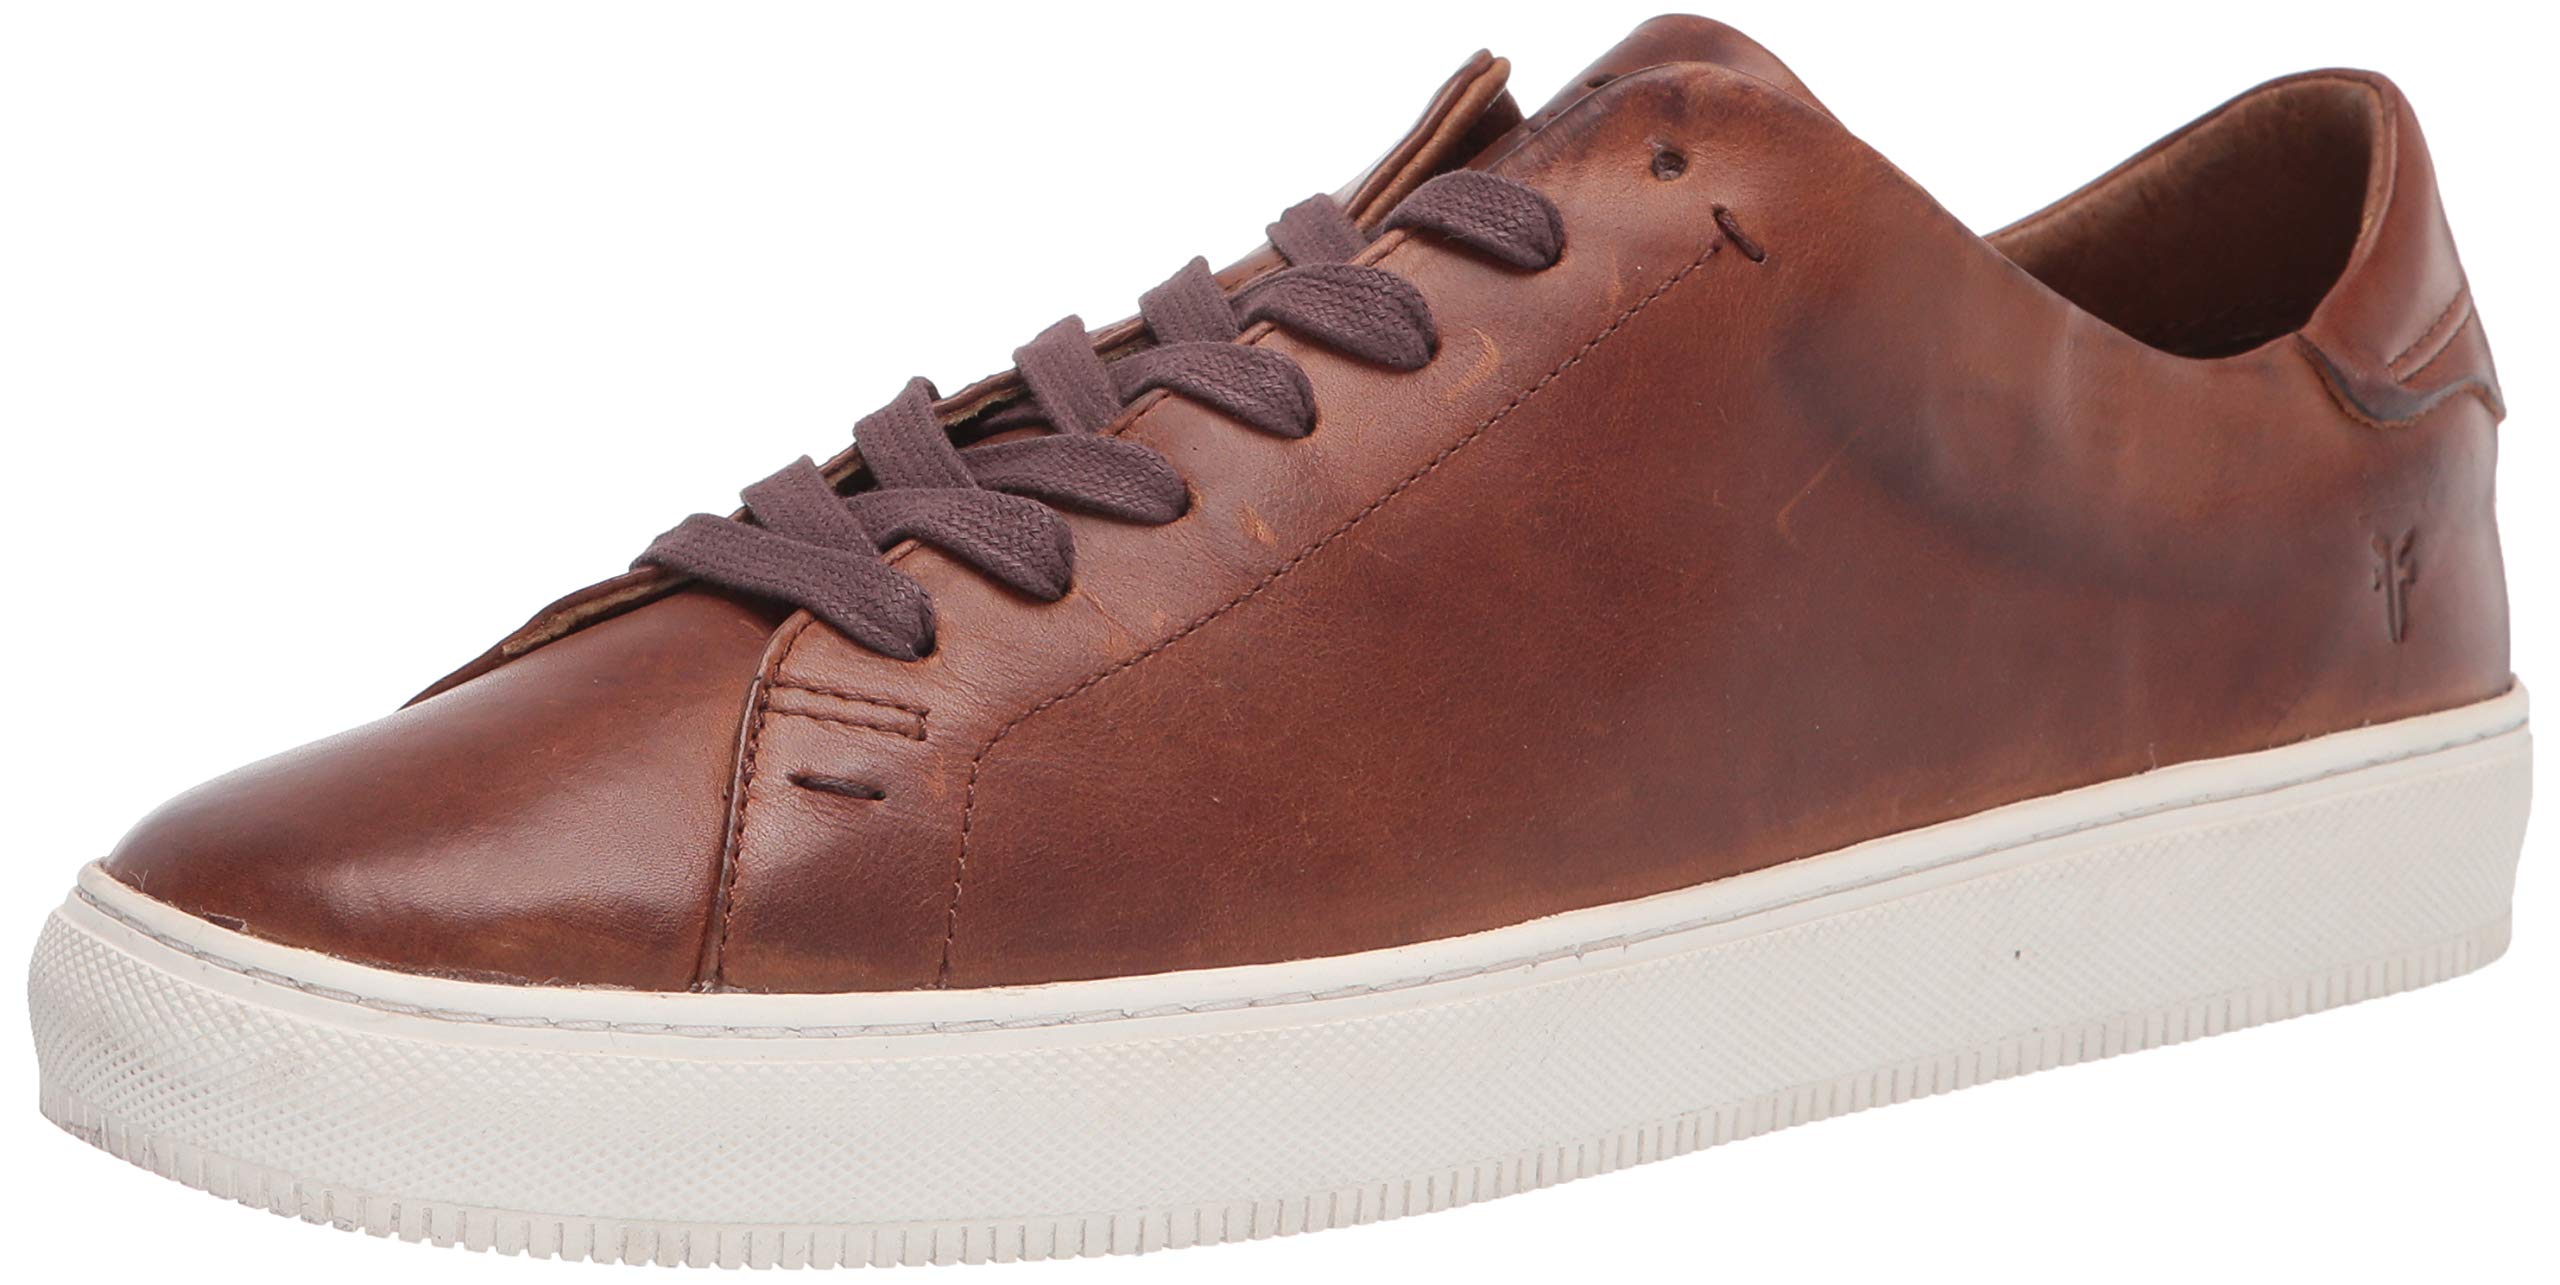 Frye Astor Low Lace Sneakers for Men Crafted from Leather with Artisanal Hand-Tacking Details, Cushioned Poron Footbeds, Padded Collar and Tongue, and Waxed Cotton Laces